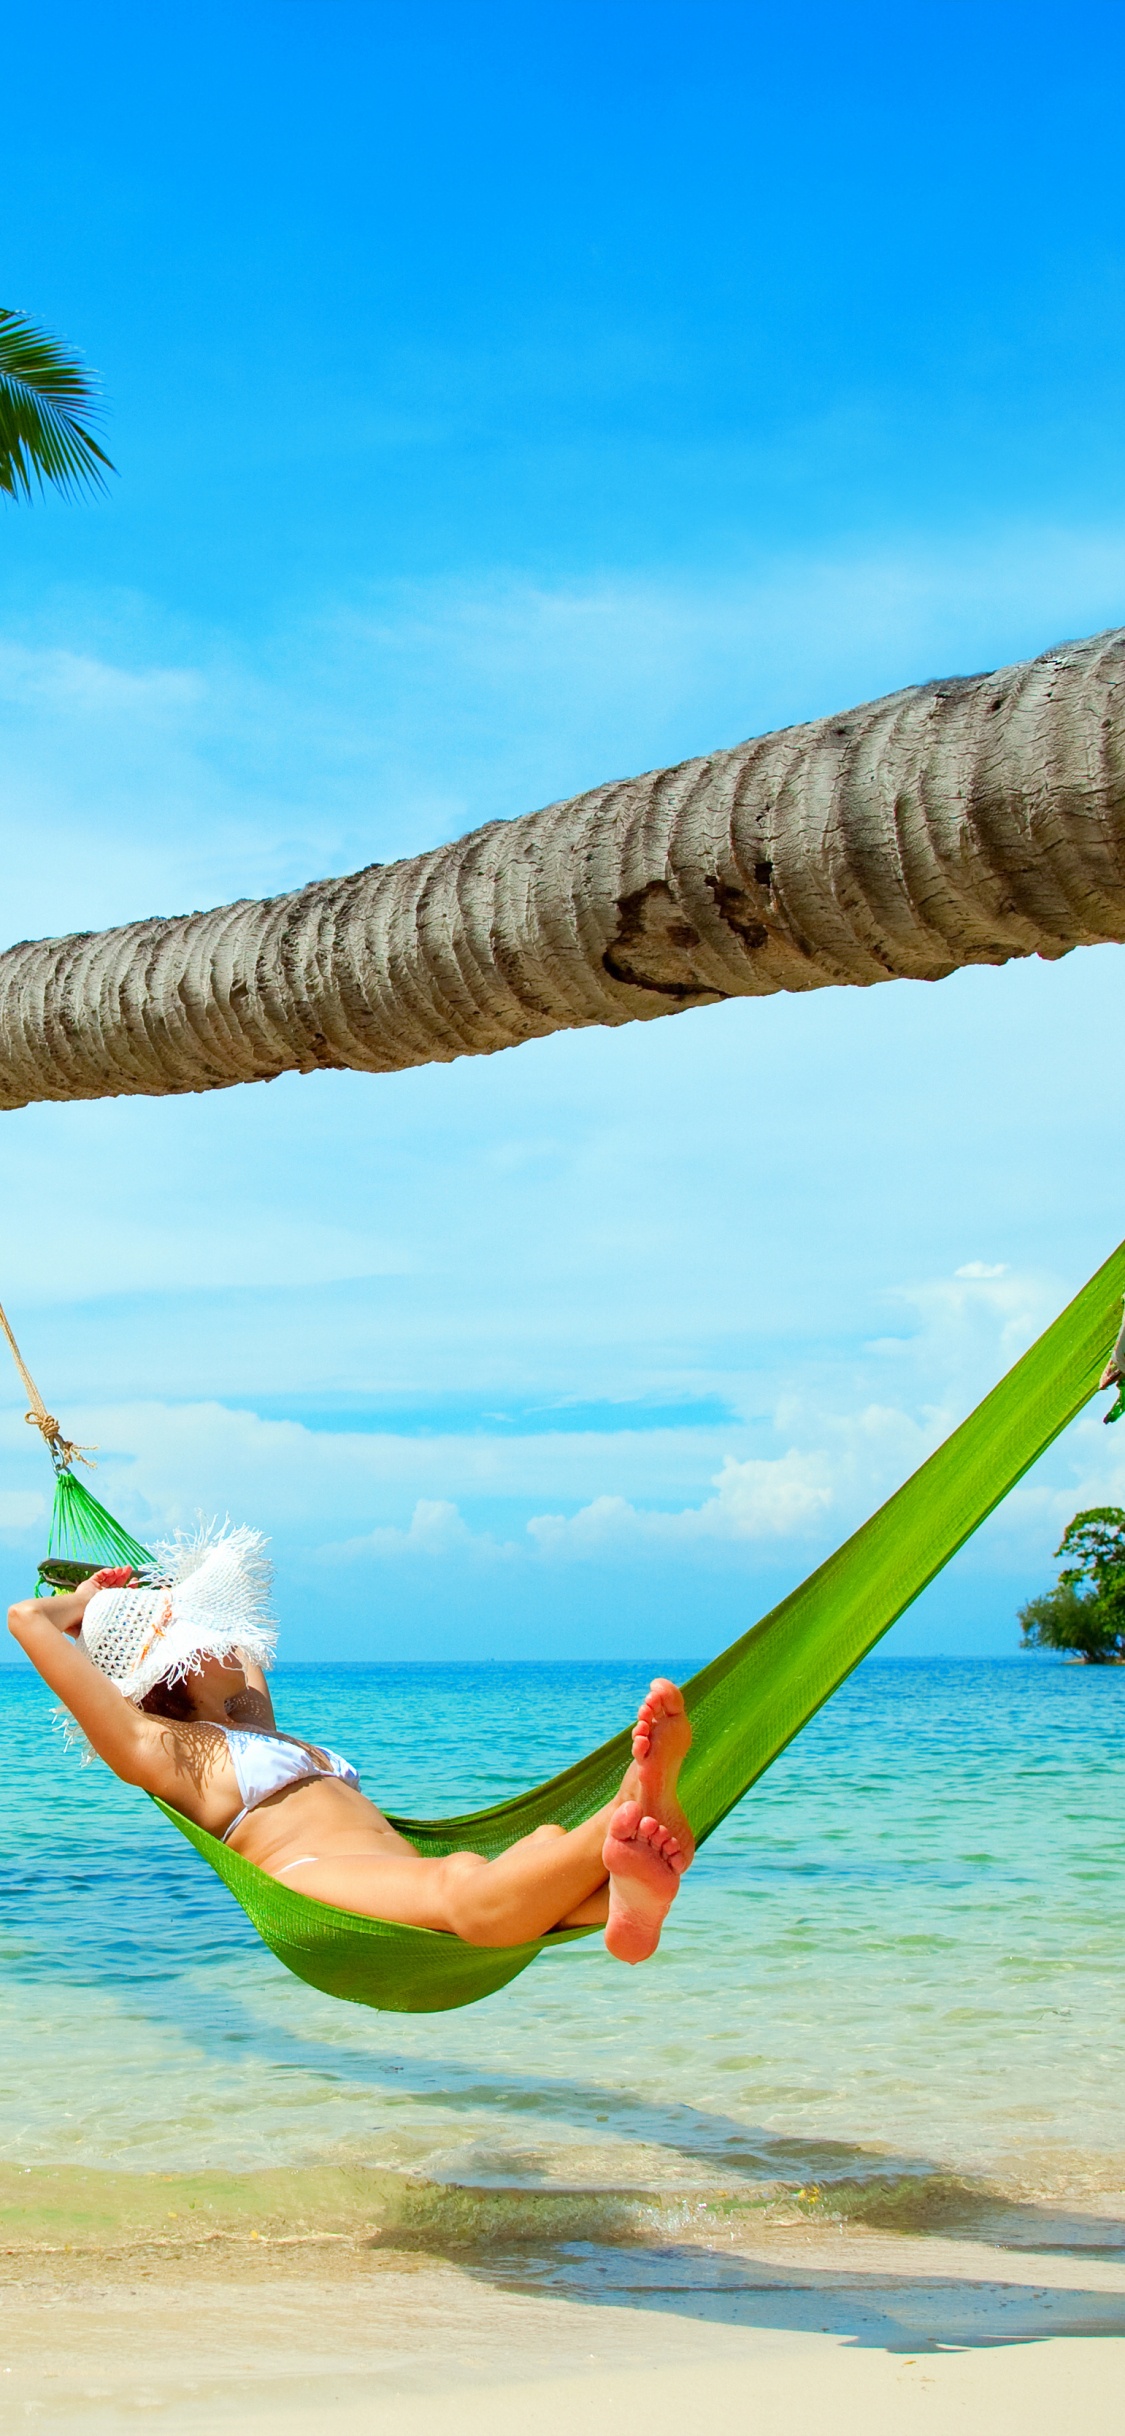 Woman in White Shirt and Green Shorts Lying on Hammock Under Coconut Tree During Daytime. Wallpaper in 1125x2436 Resolution